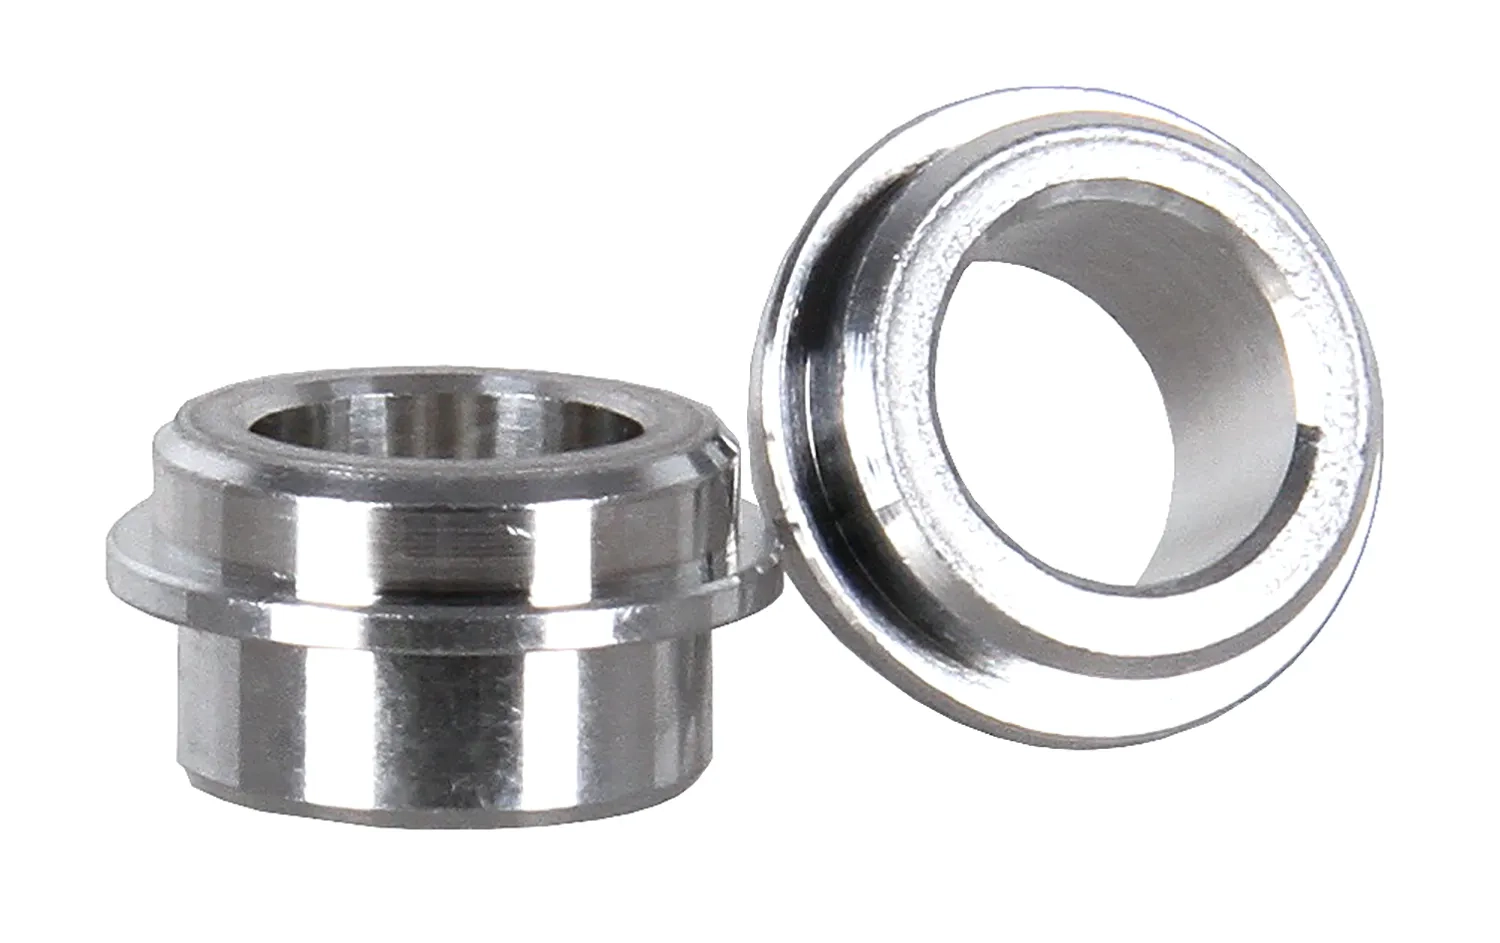 Deck spacers 7mm,11mm,13mm